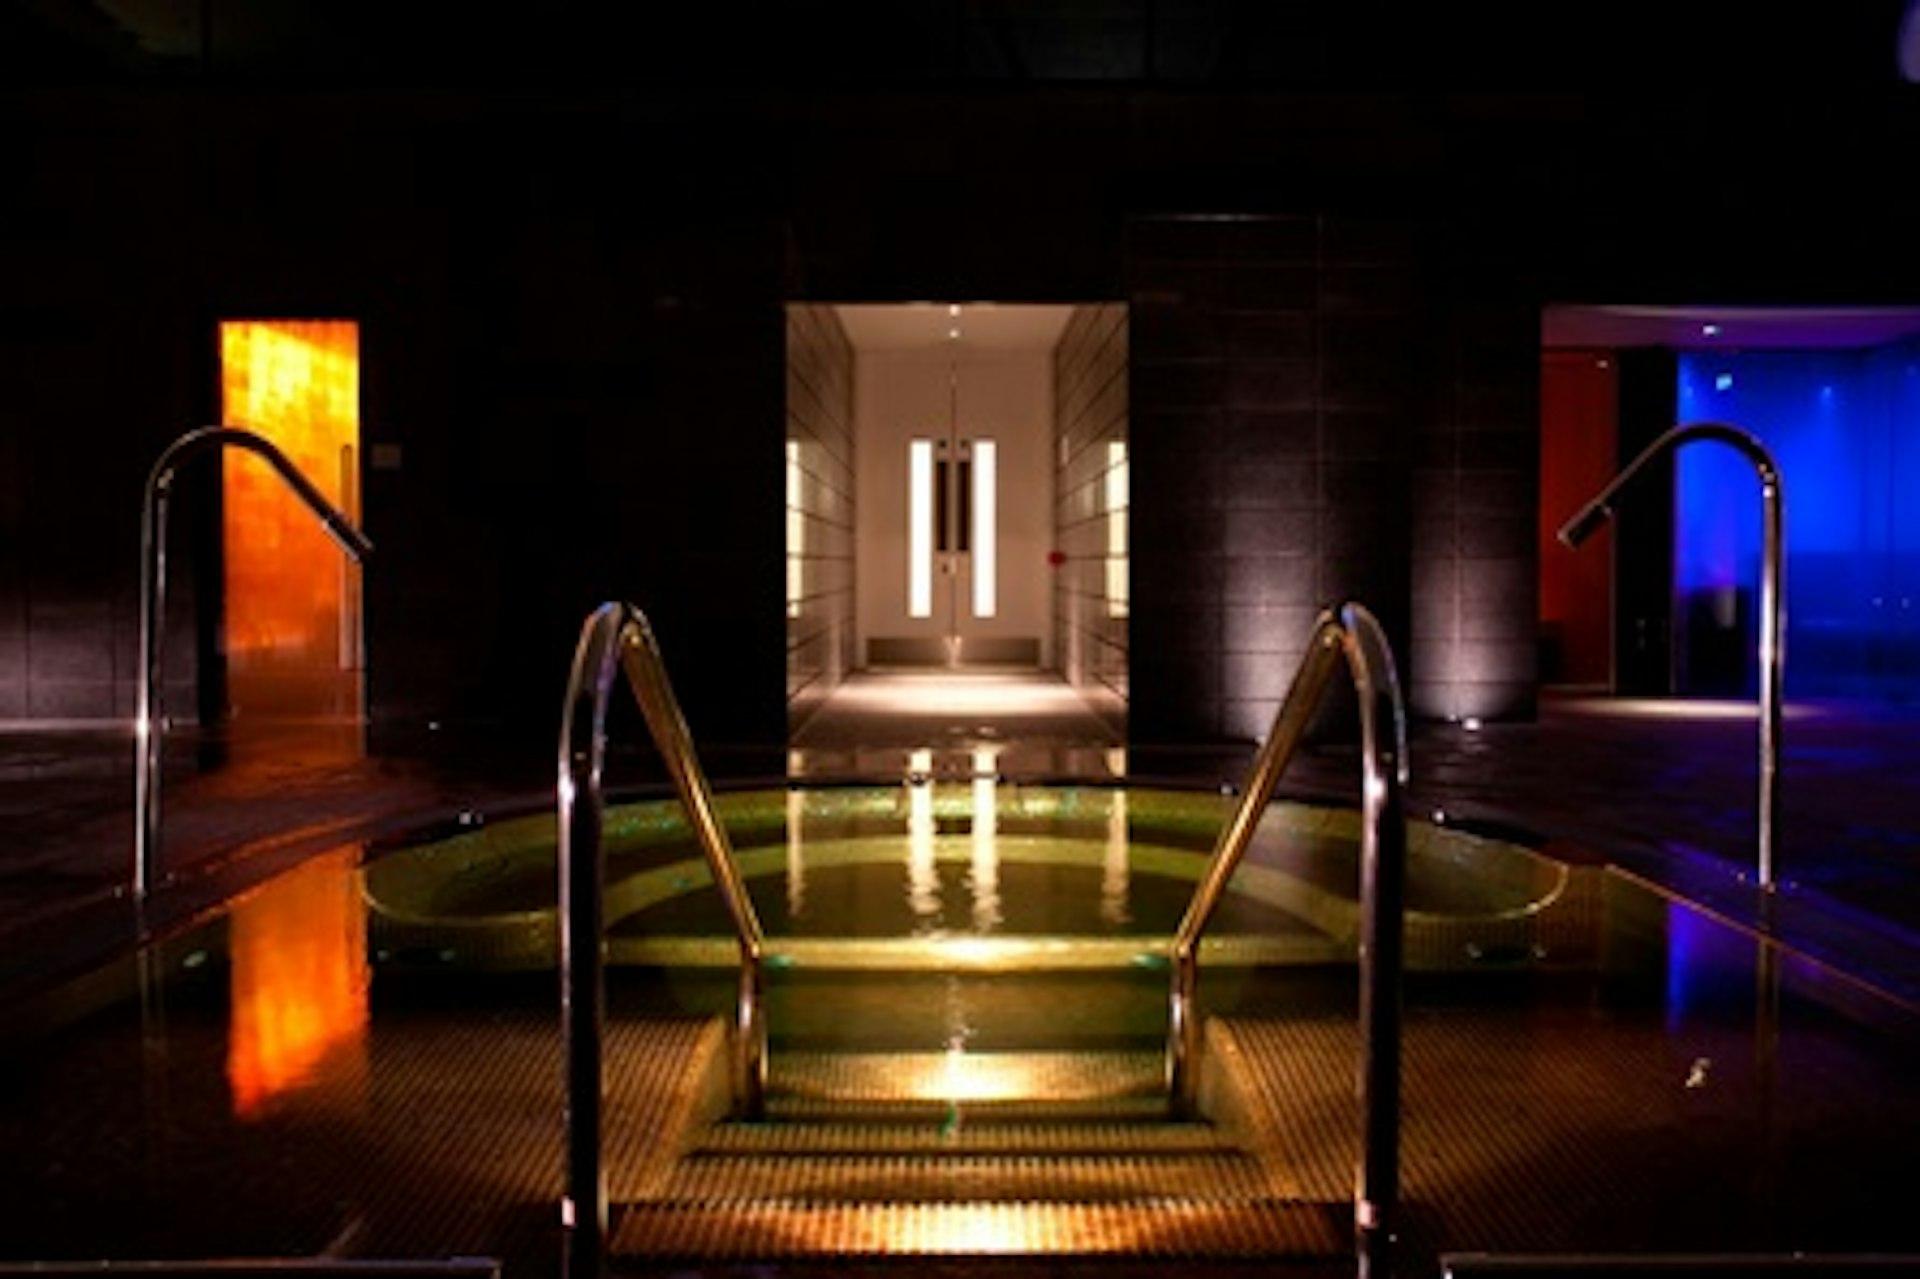 One Night Love Life Spa Break for Two at The Lifehouse Spa & Hotel 4